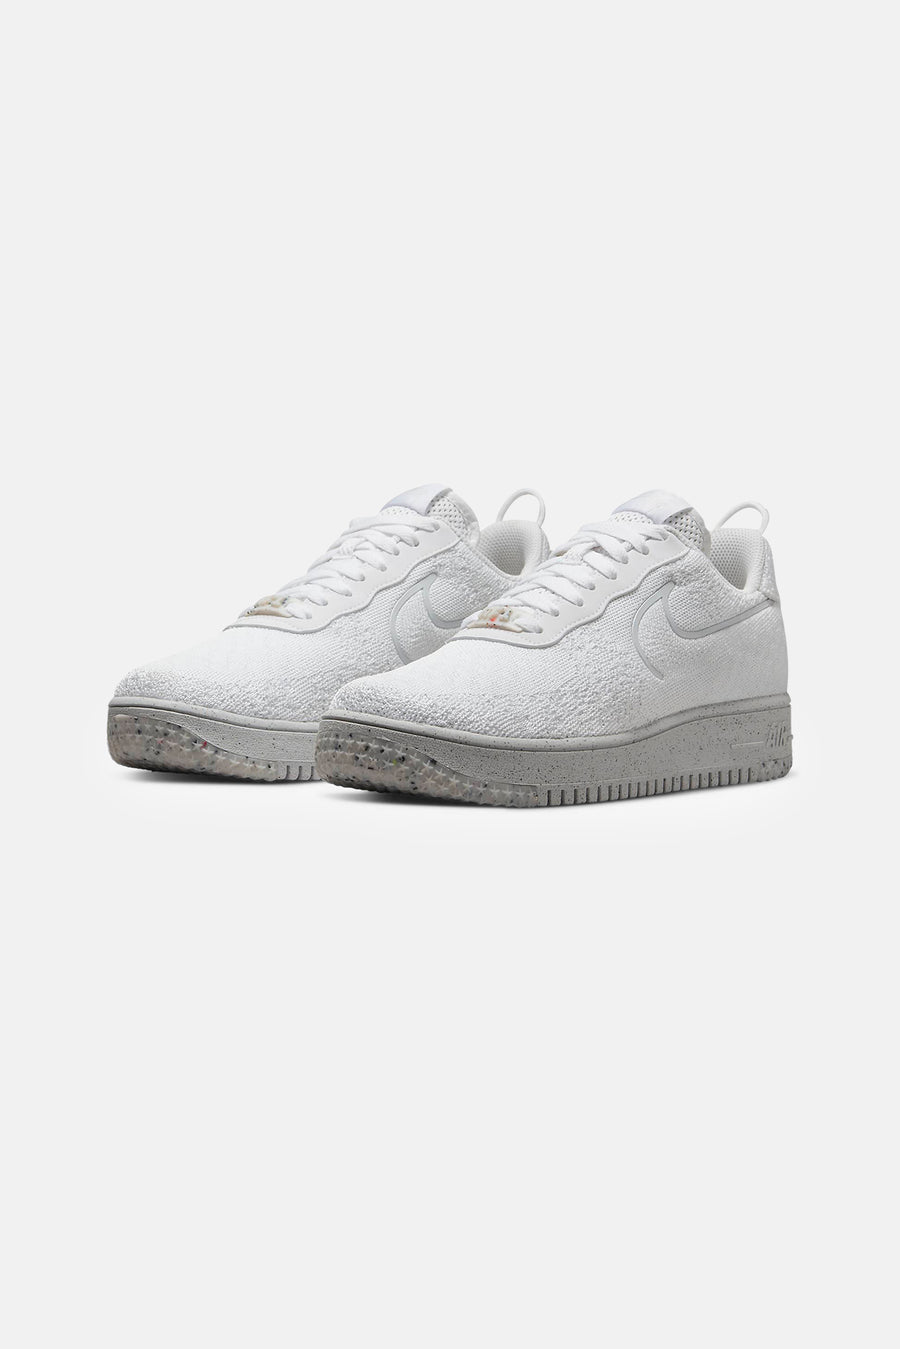 Men's Air Force 1 Crater Flyknit White